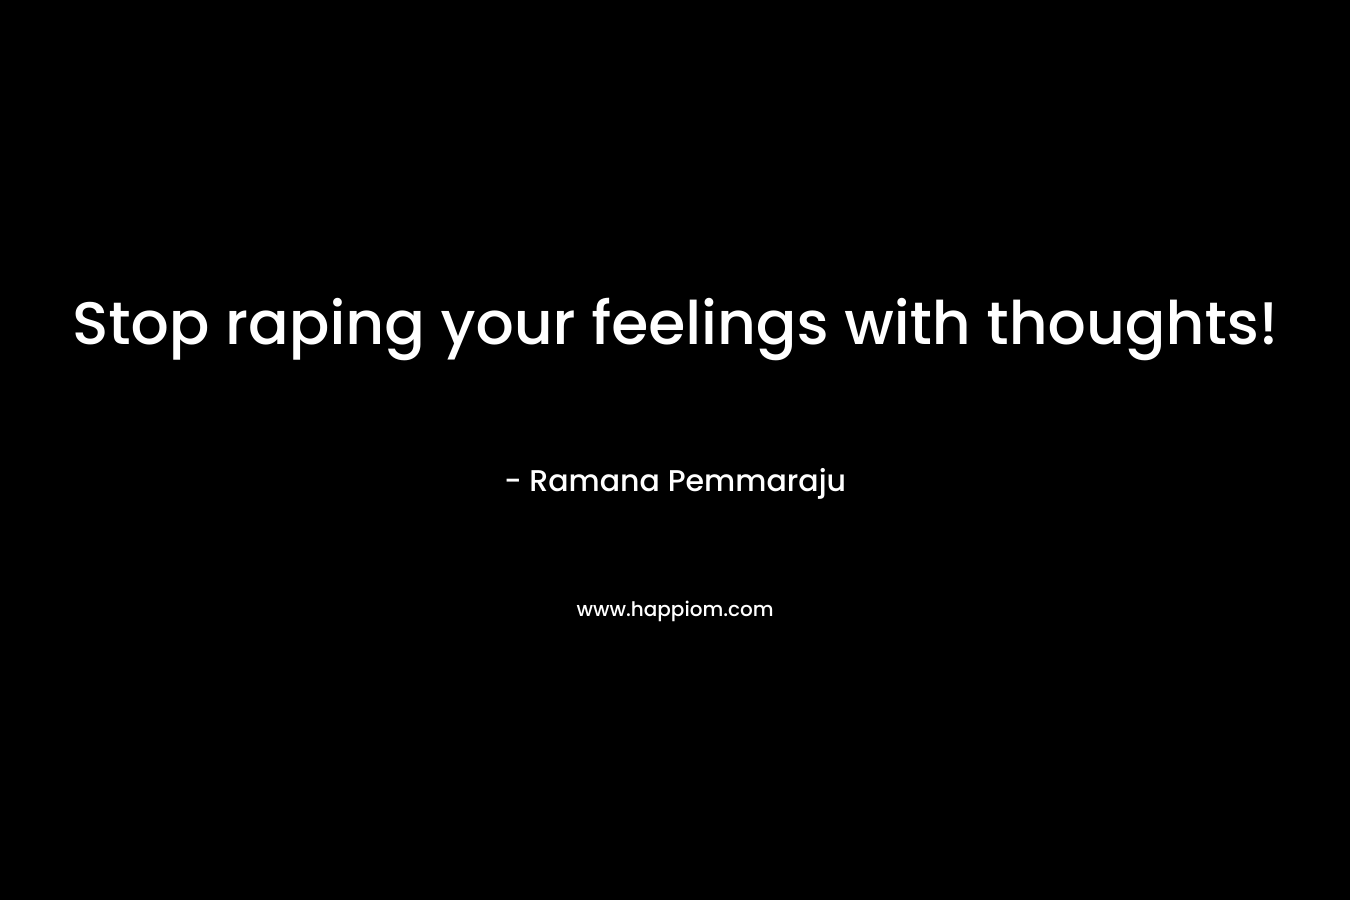 Stop raping your feelings with thoughts!